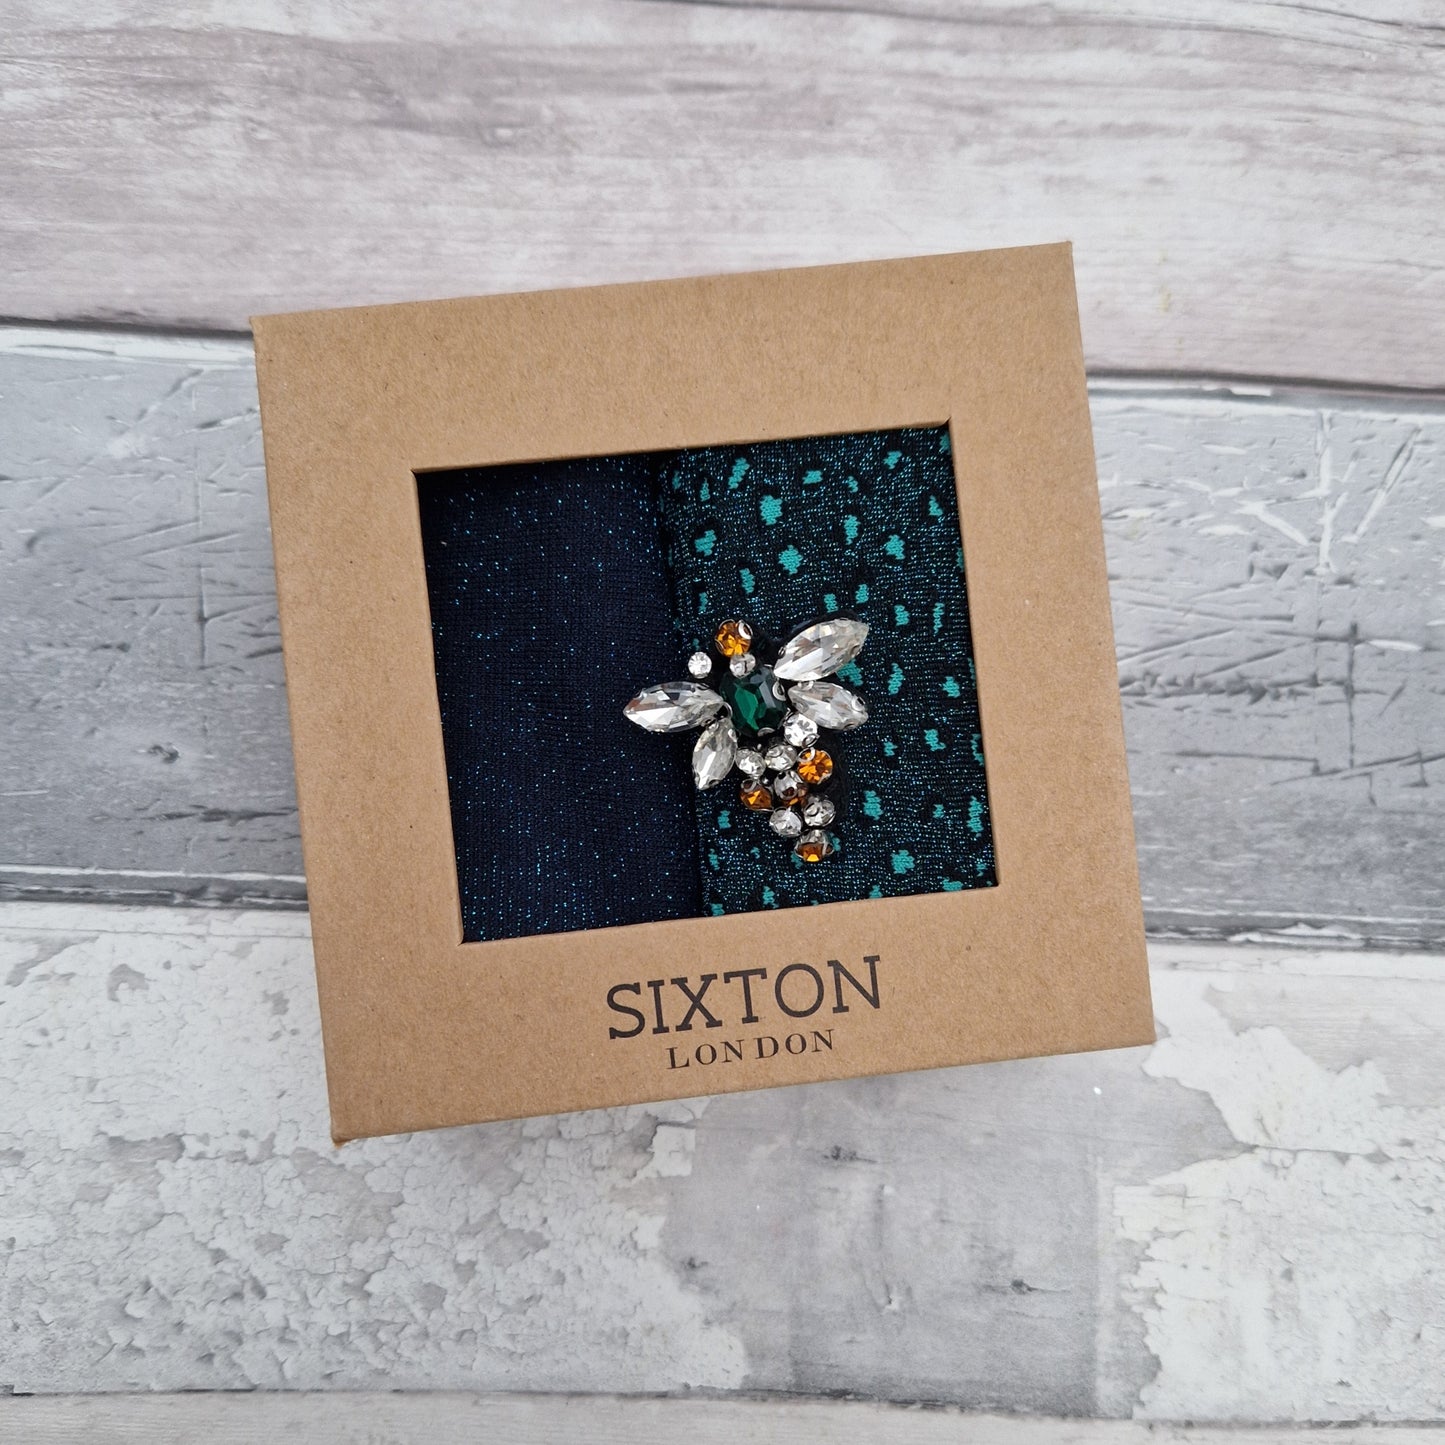 A pair of teal coloured socks in a presentation gift box with a Bee Brooch.